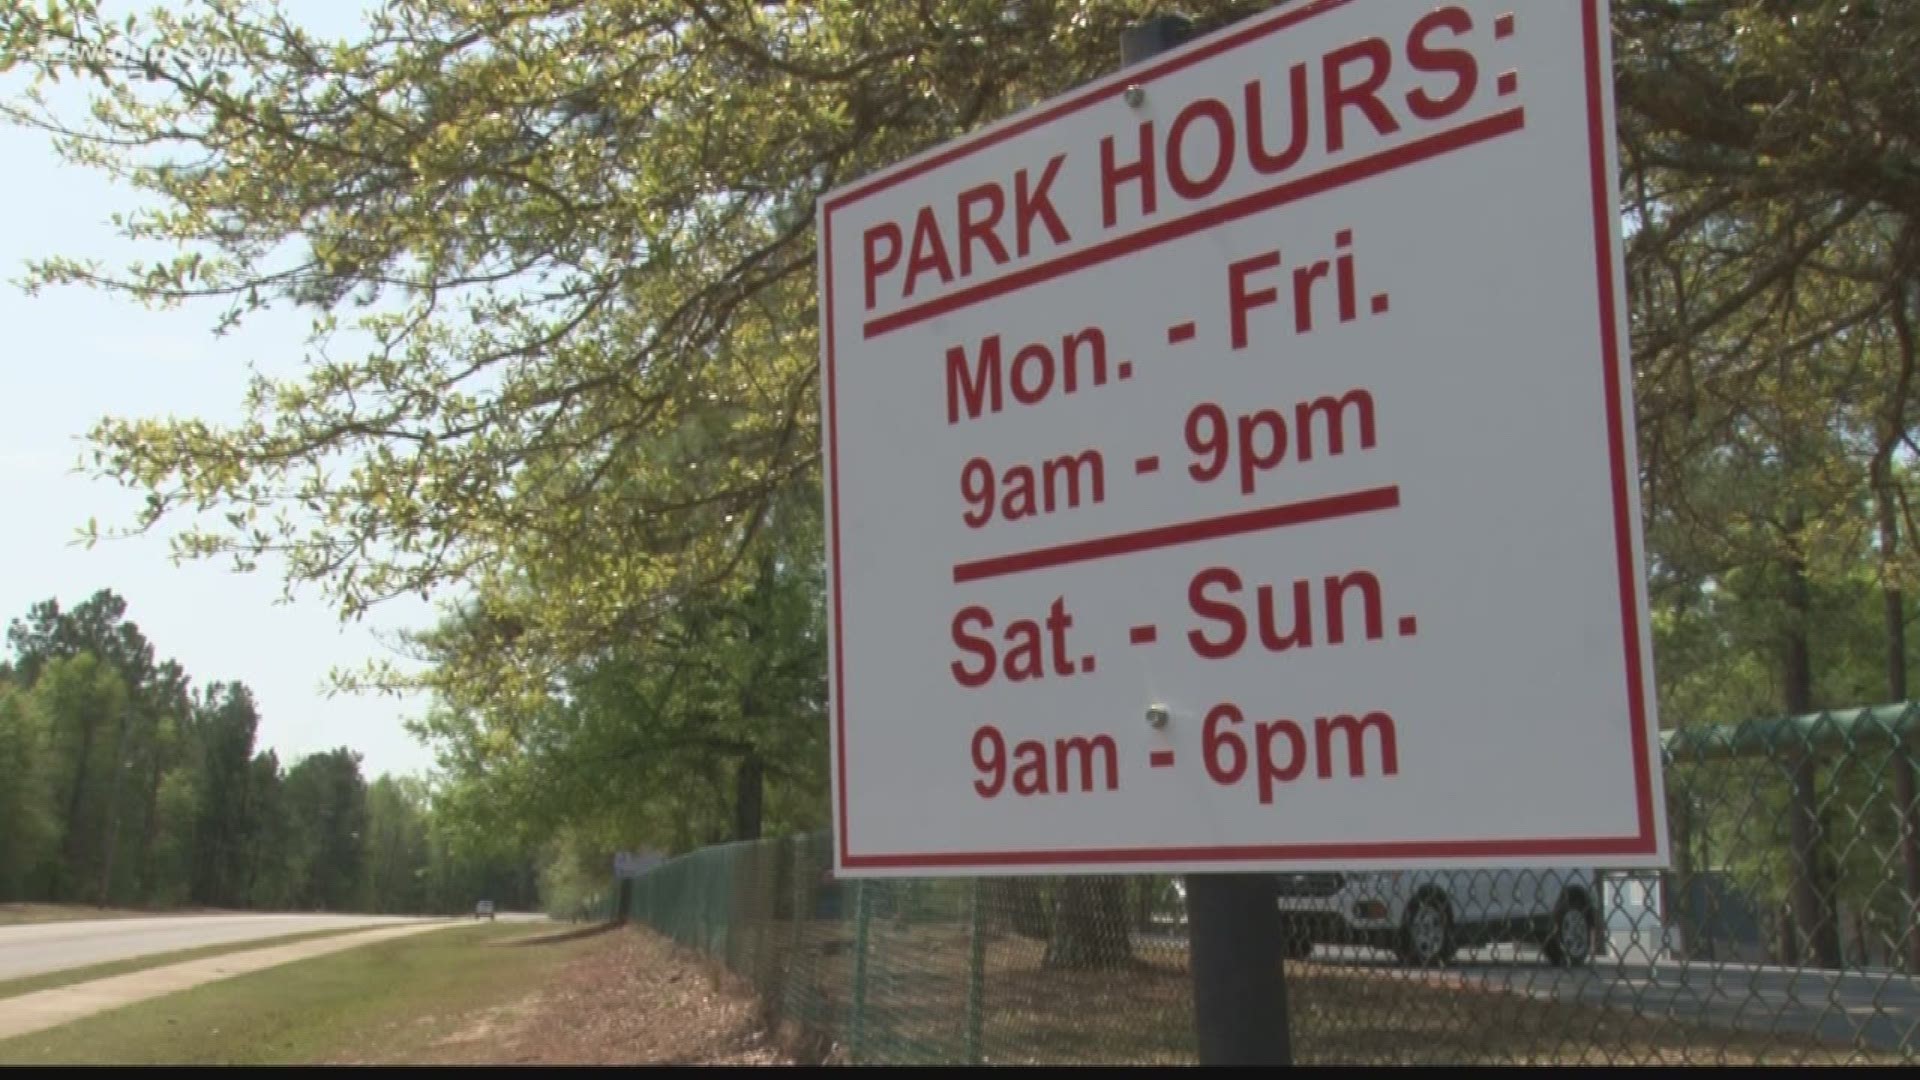 Washington County leaders decided to close Kaolin Park three hours earlier on the weekends in order to keep the community safe. They believe it'll cut down on drug use, loitering, and other problems in the area.